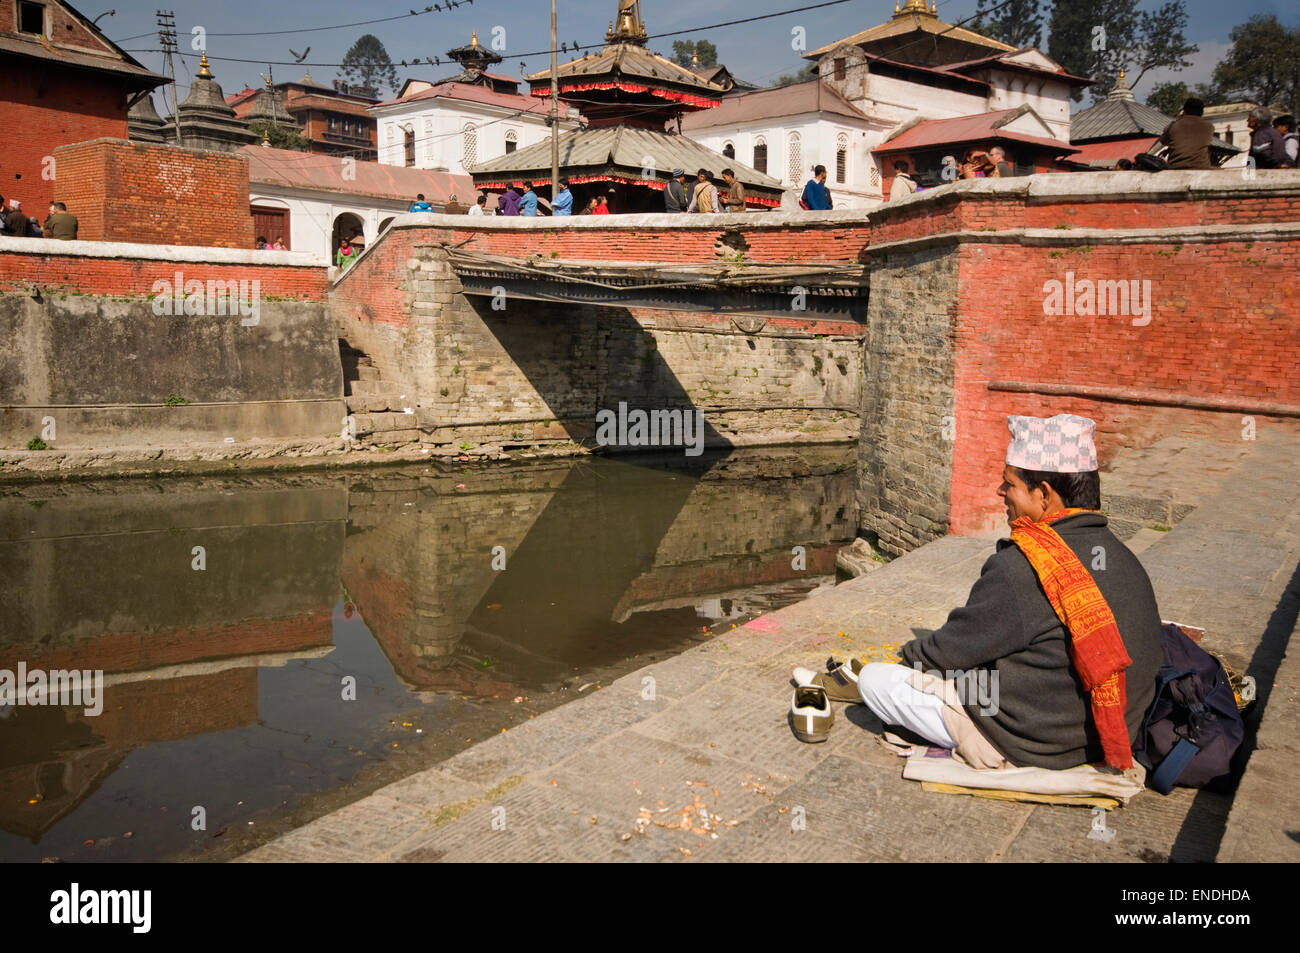 NEPAL, Kathmandu, Pashupatinath, man in traditional dress sitting next to the Bagmati River (a tributary of the Ganges) with Pas Stock Photo